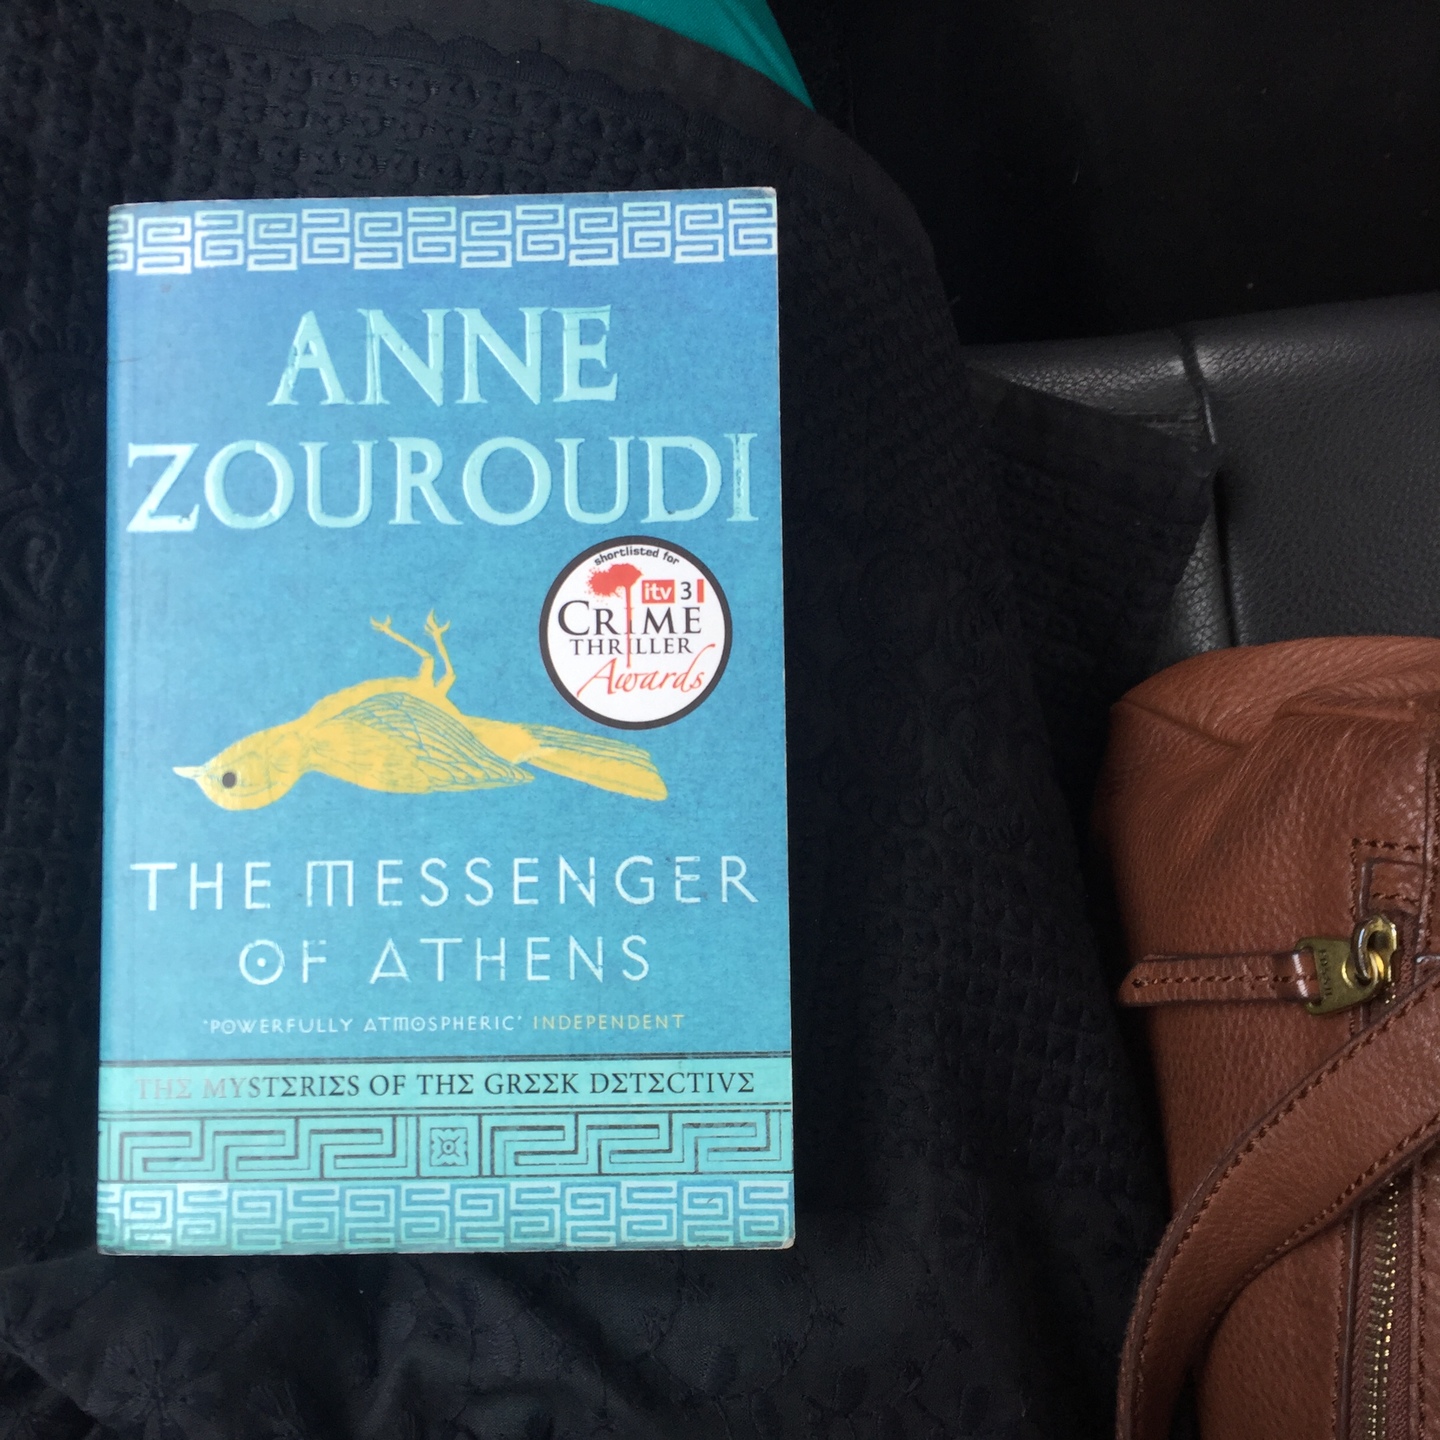 The Messenger of Athens by Anne Zouroudi [Paperback]